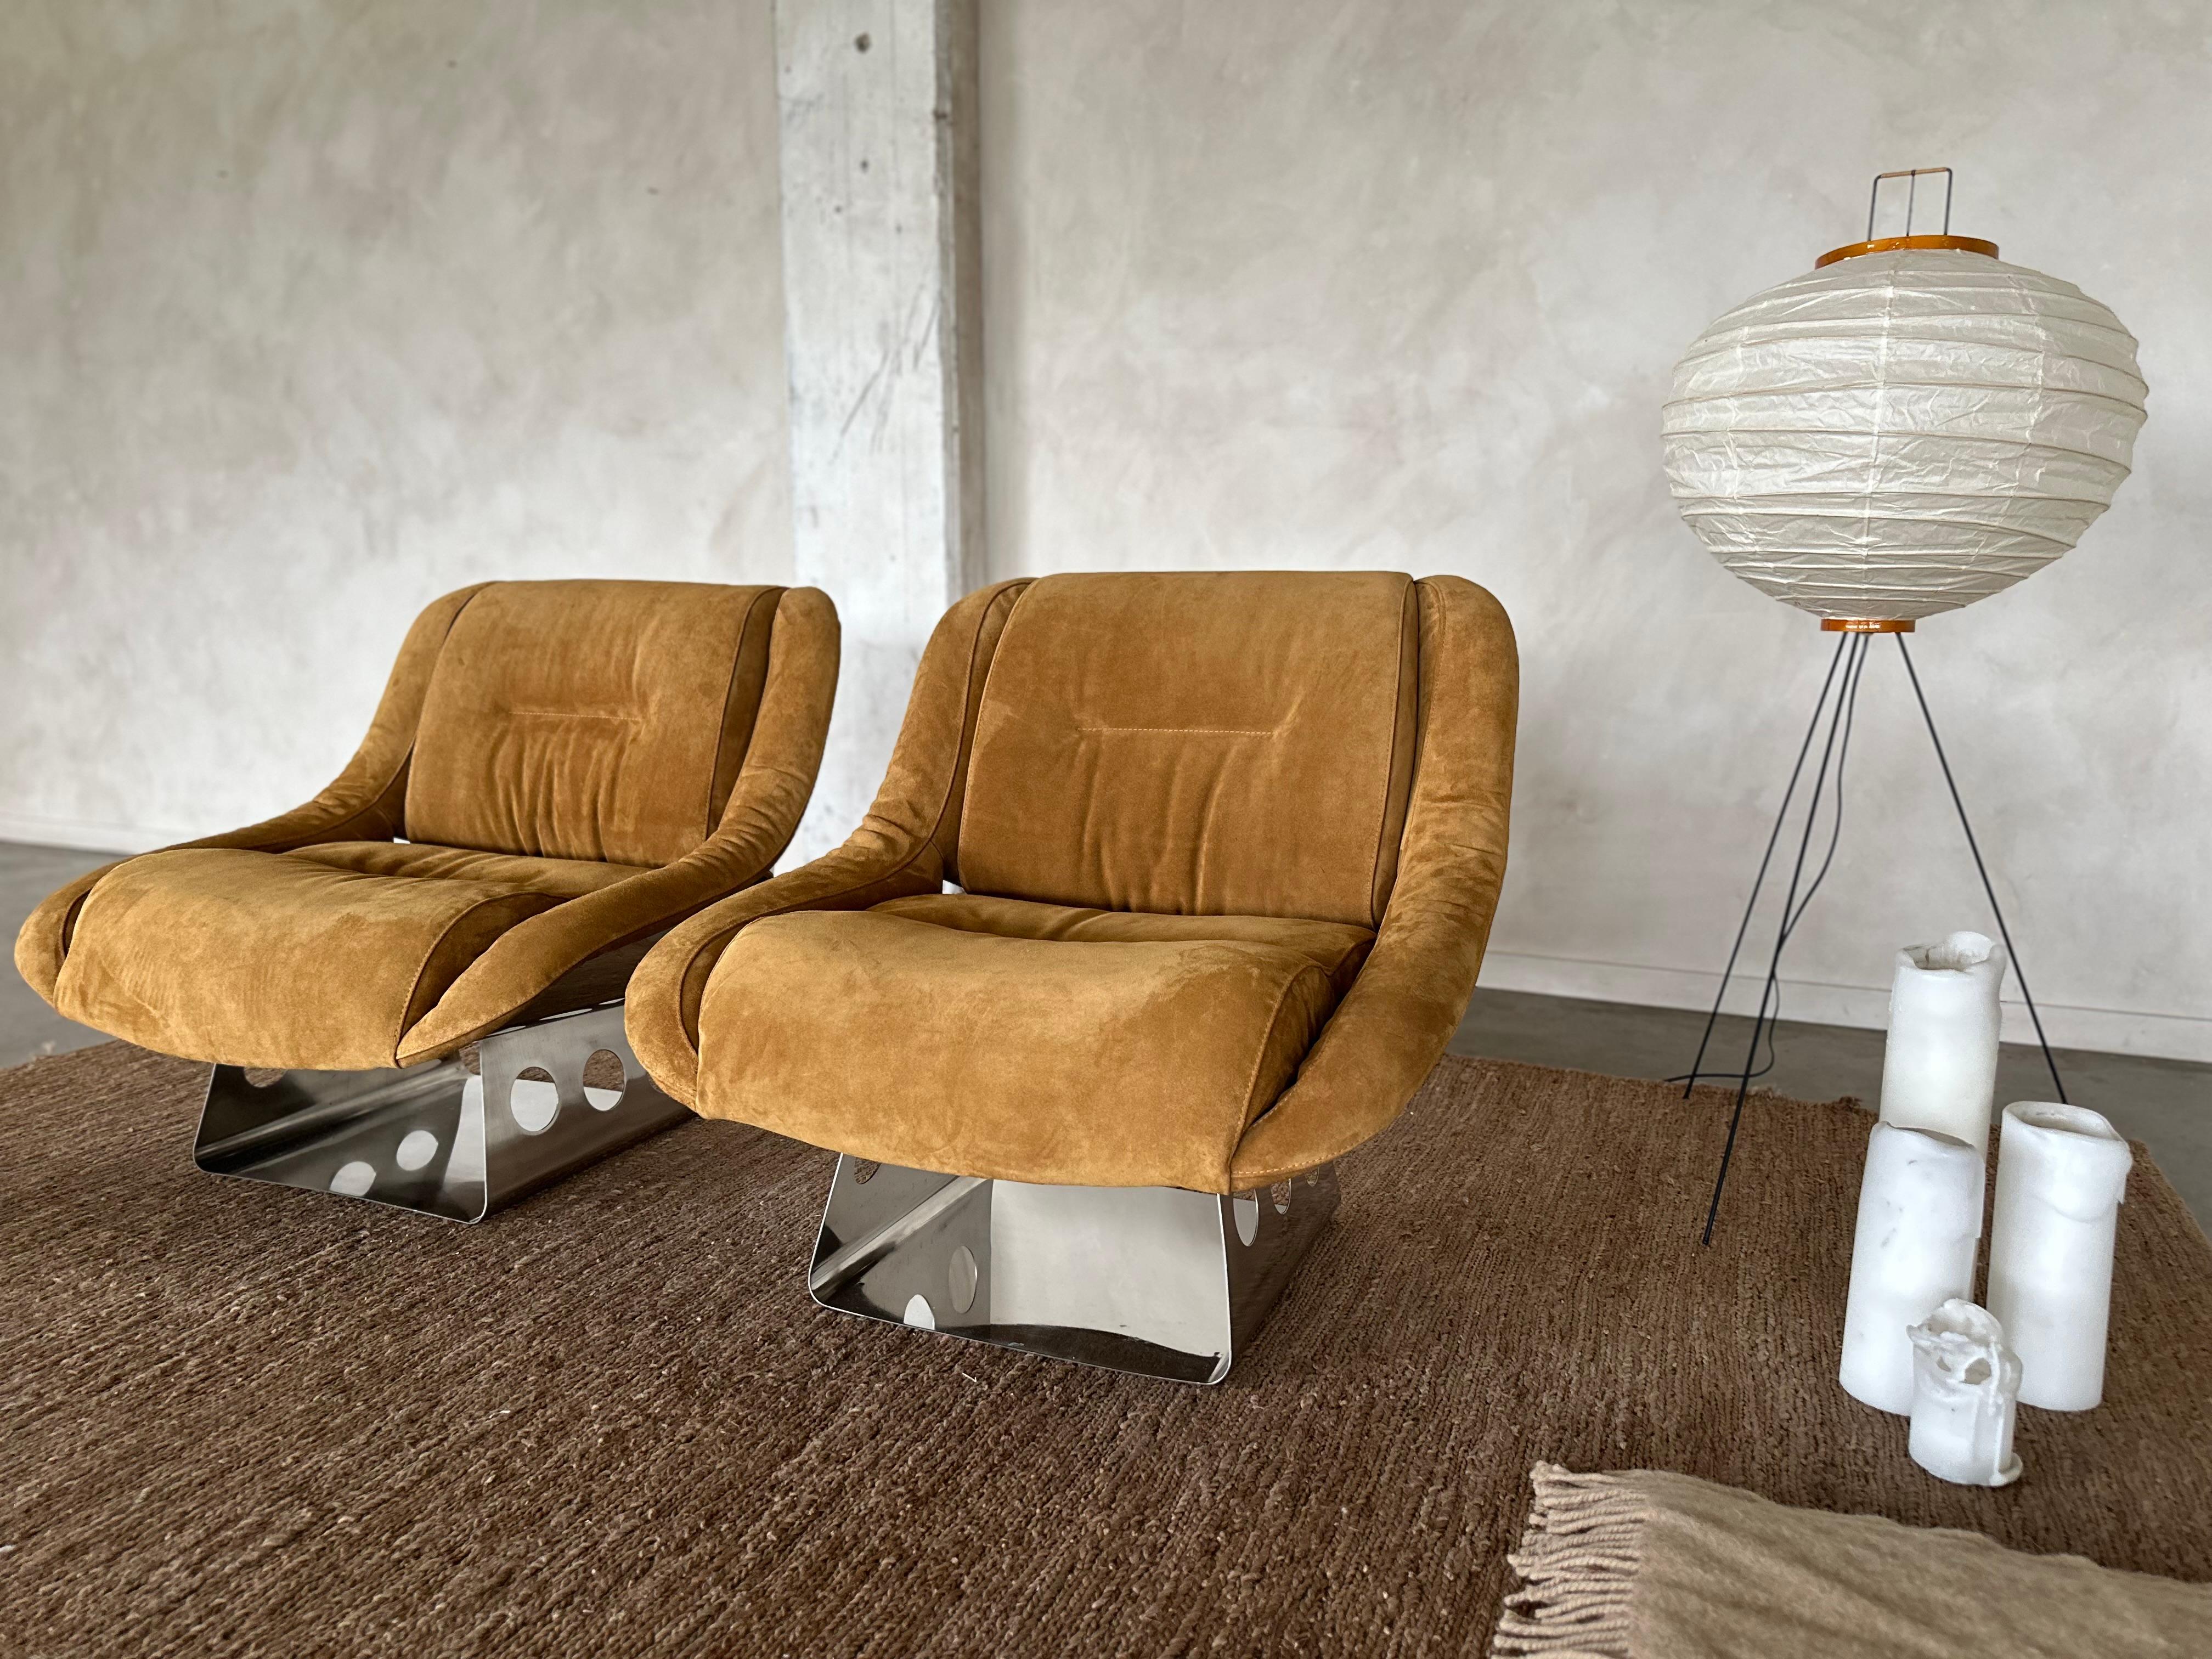 Rare Suede and Stainless Steel Lounge Chairs by Rima Padova, 1974 For Sale 8